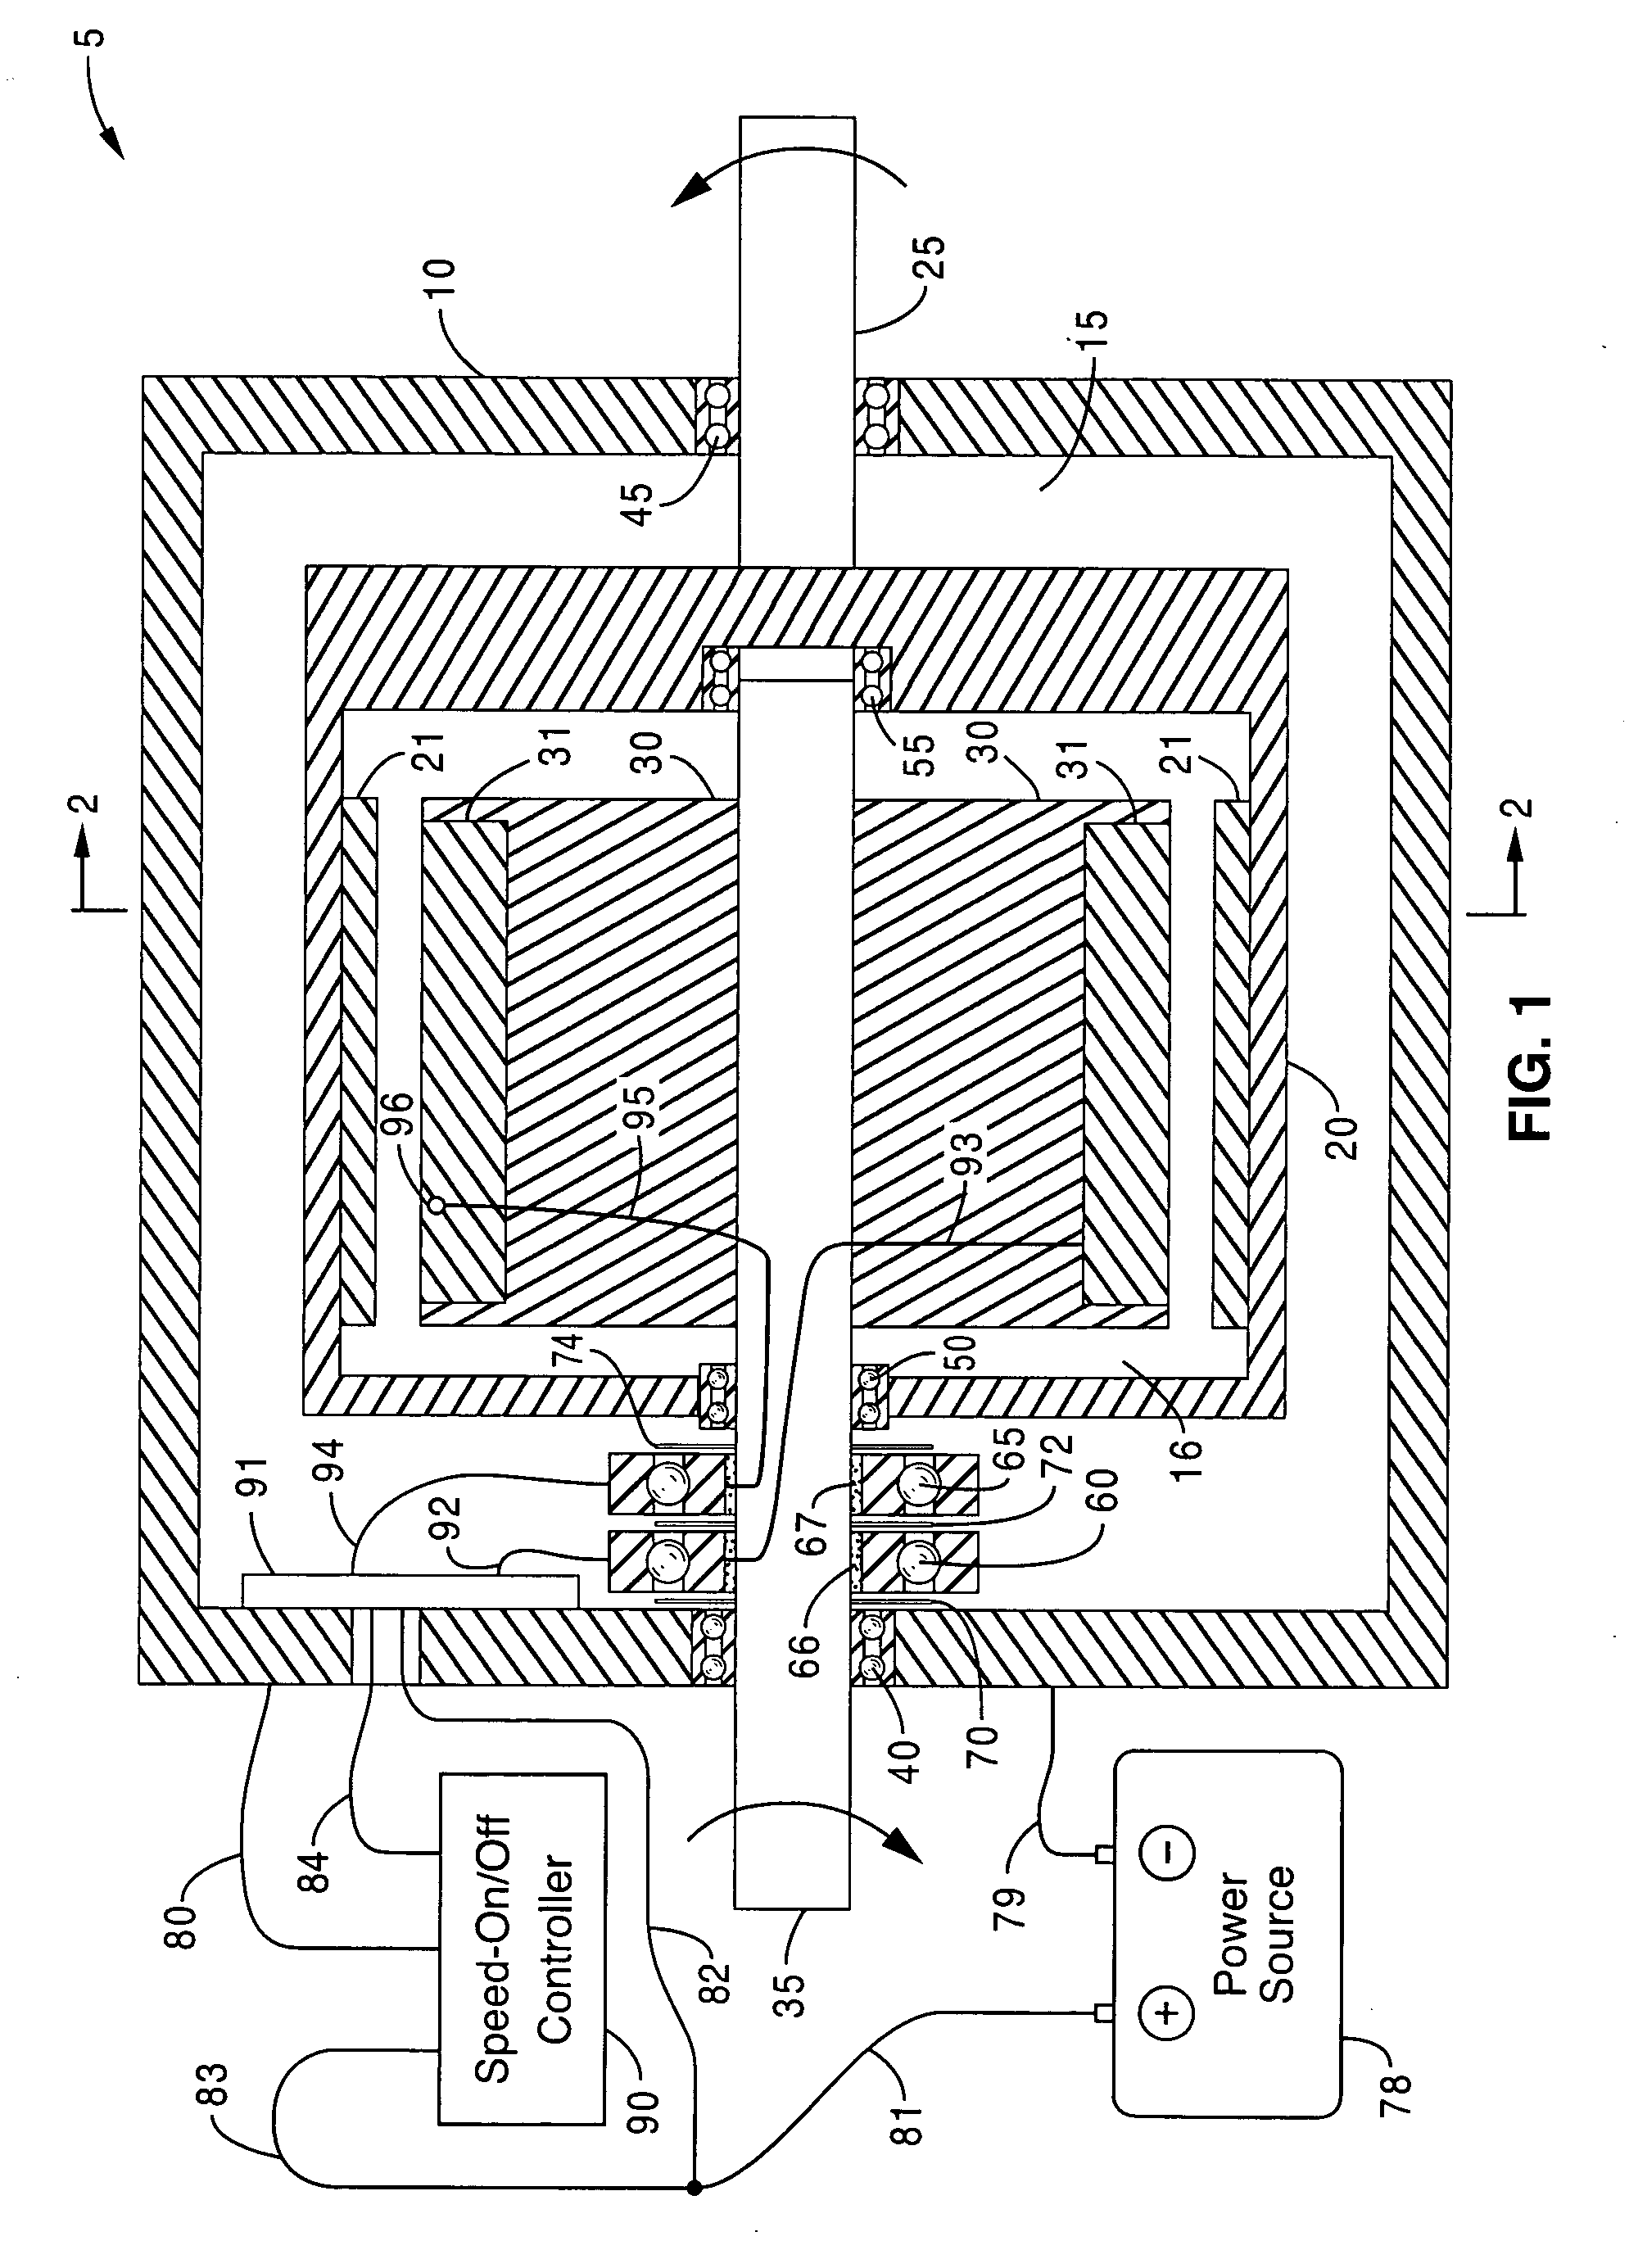 Brushless counter-rotating electric apparatus and system